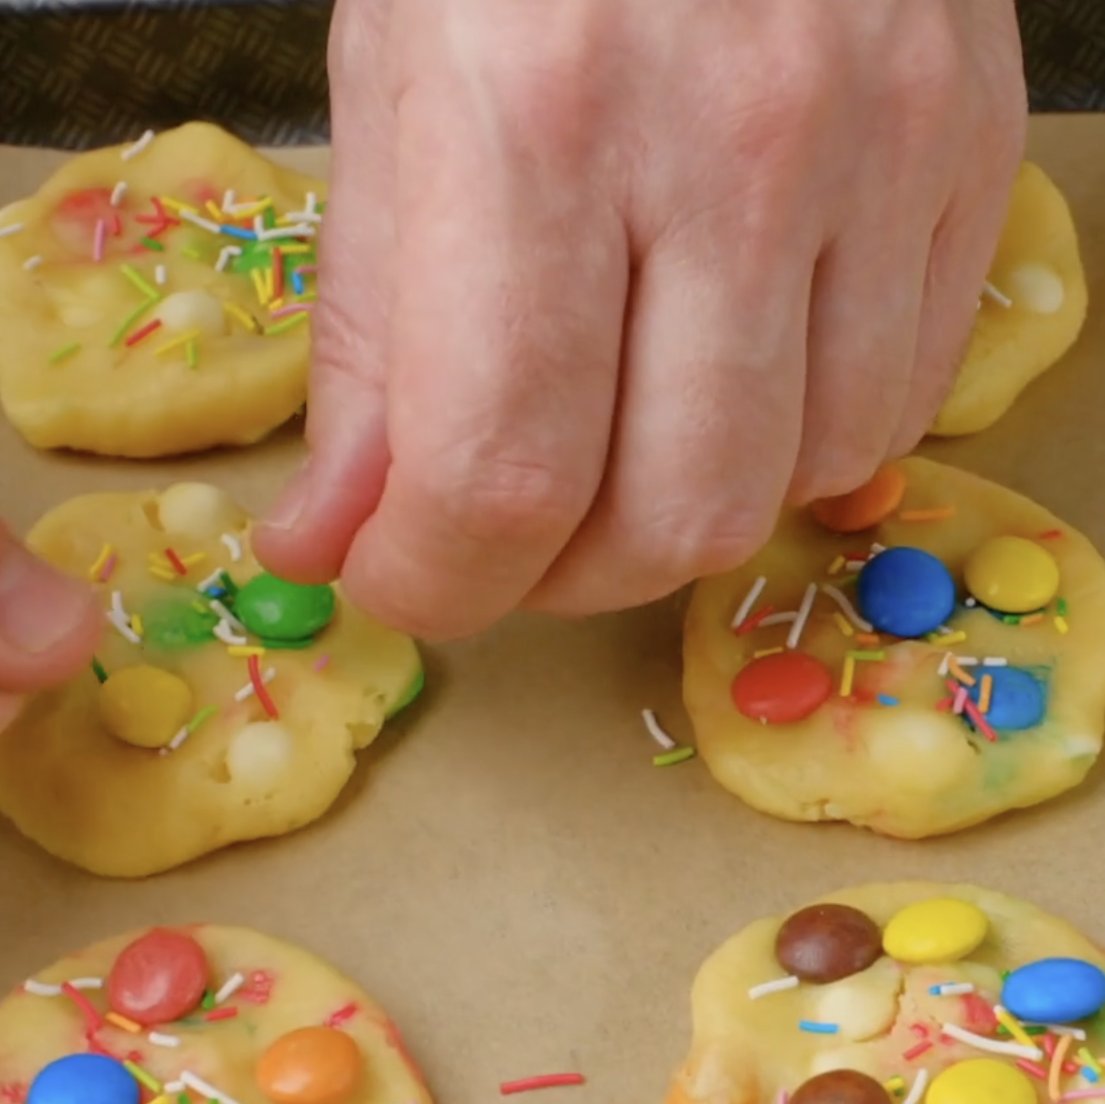 Extra M&Ms and sprinkles being added by hand on flattened M&M cookie dough.